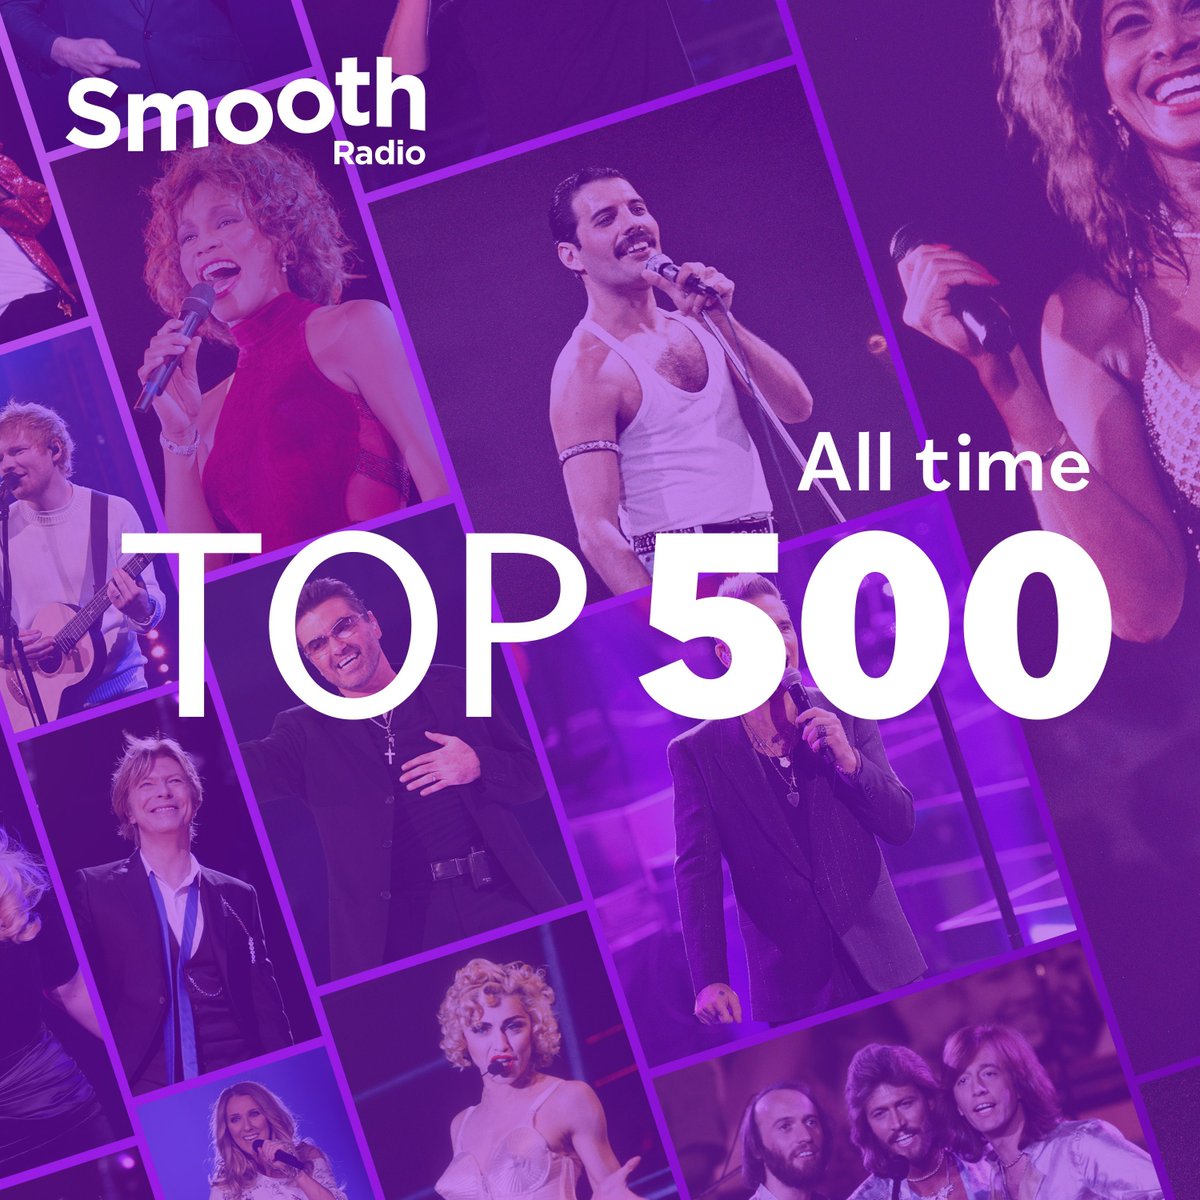 Listen to this year's top 100 songs from Smooth's All Time Top 500 as voted for by you, including iconic hits from George Michael, Queen, Michael Jackson, Stevie Wonder and more! The Smooth All Time Top 500 Live Playlist on @GlobalPlayer 👉 globalplayer.com/playlists/2SWj… #Smooth500